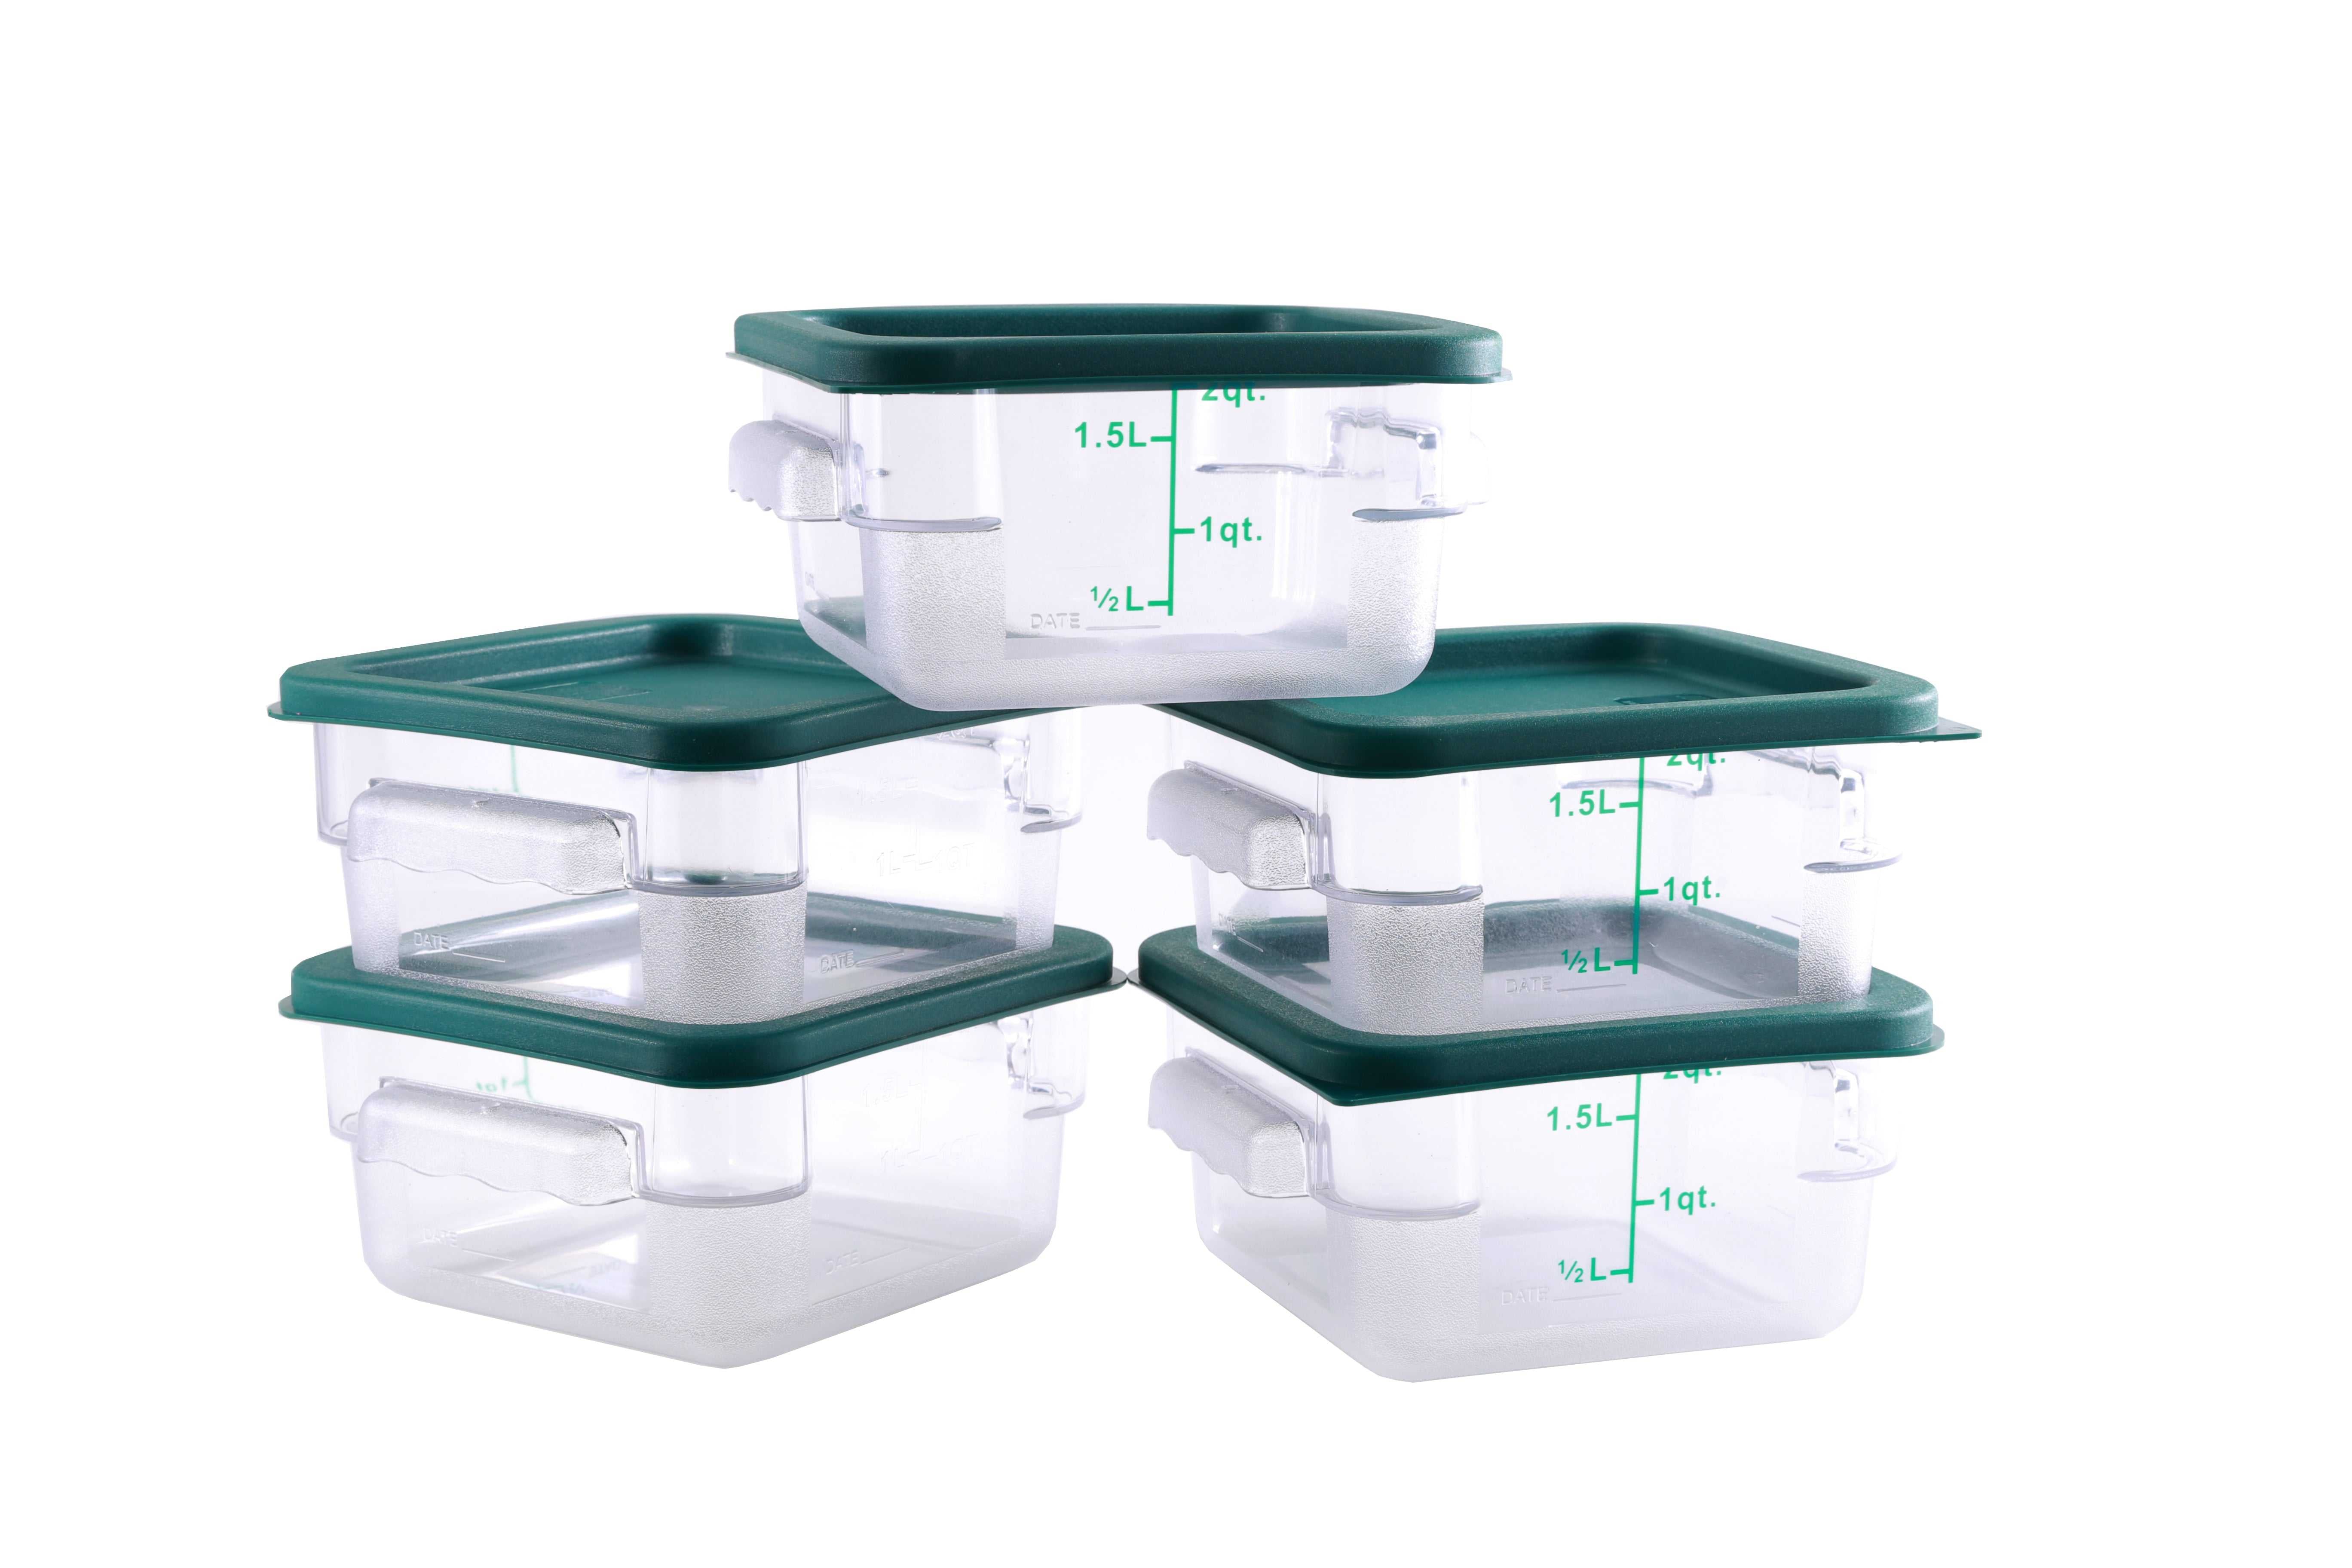 HAKKA 2 Qt Commercial Grade Square Food Storage Containers with Lids,Polycarbonate,Clear - Case of 5